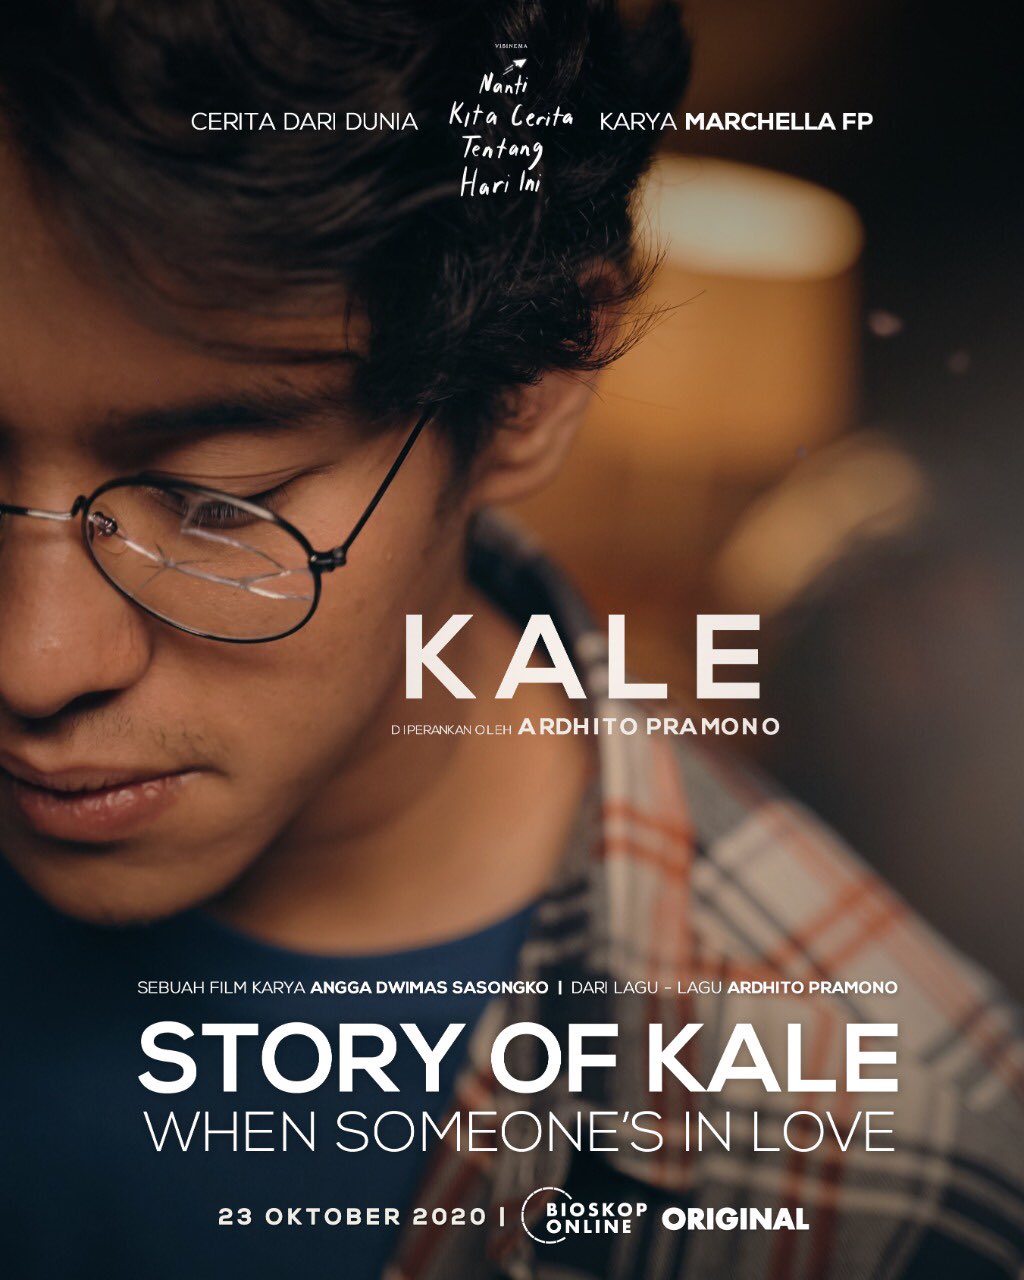 Story.of.Kale.When.Someones.in.Love.2020 Hindi Dub [Voice Over] 1080p 720p 480p WEB-DL Online Stream PariMatch